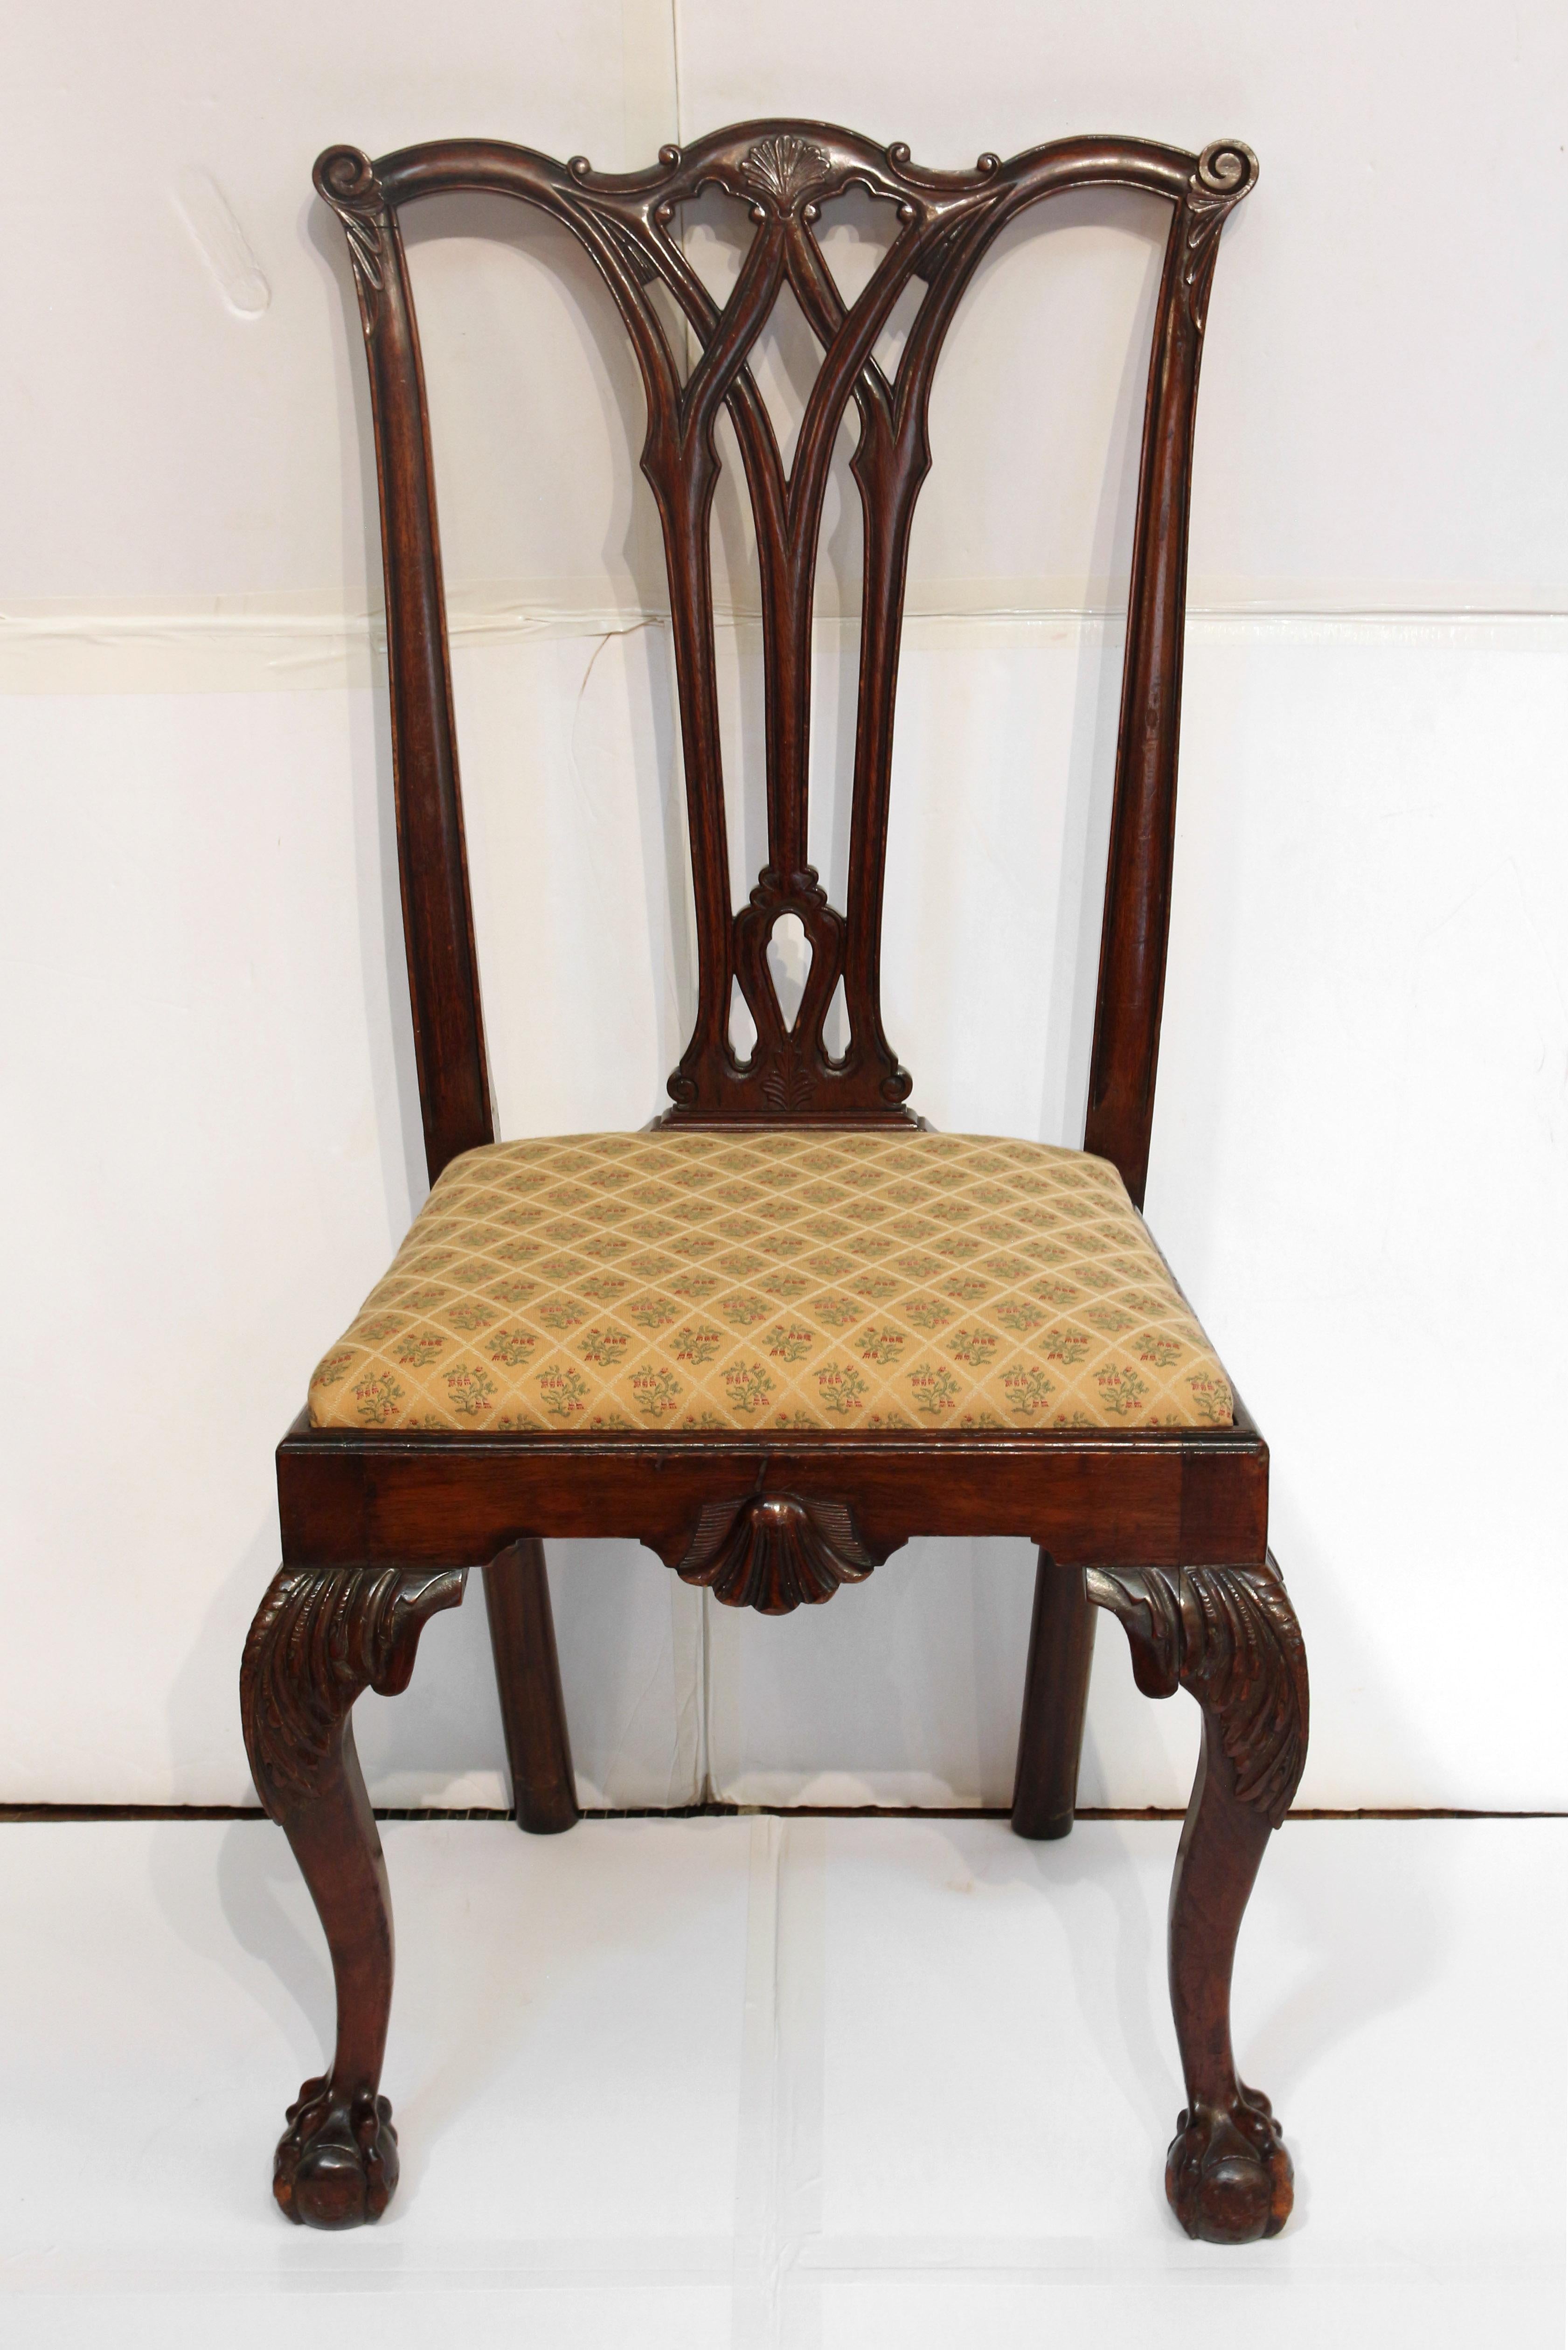 Circa 1900 Set of 4 Dining Chairs, Colonial Revival, Philadelphia form. All sides; mahogany. Richly developed with Gothic influenced back splats, cabriole legs with ball & claw feet, carved kneed & shell carved apron. 21